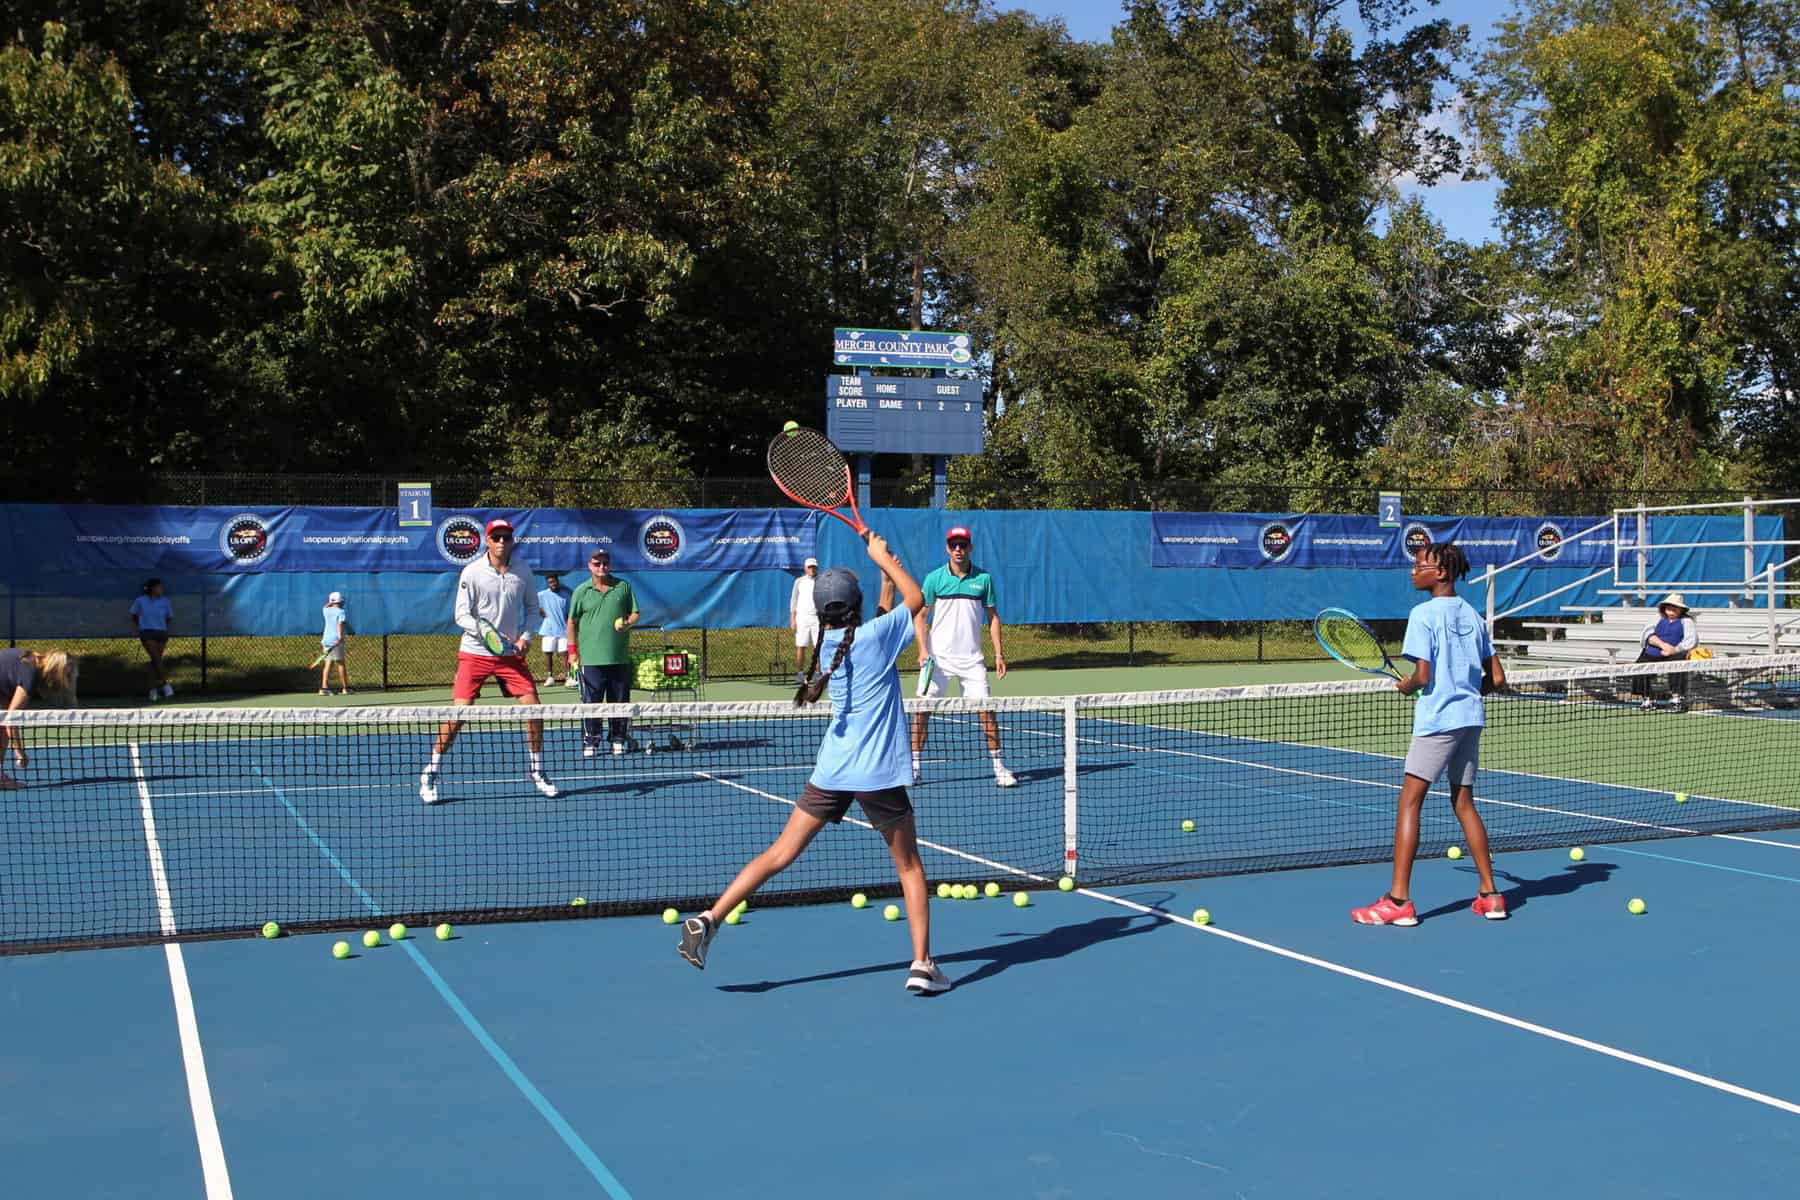 National Junior Tennis and Learning of Trenton gala raises more than $300,000 for youth programs and scholarships